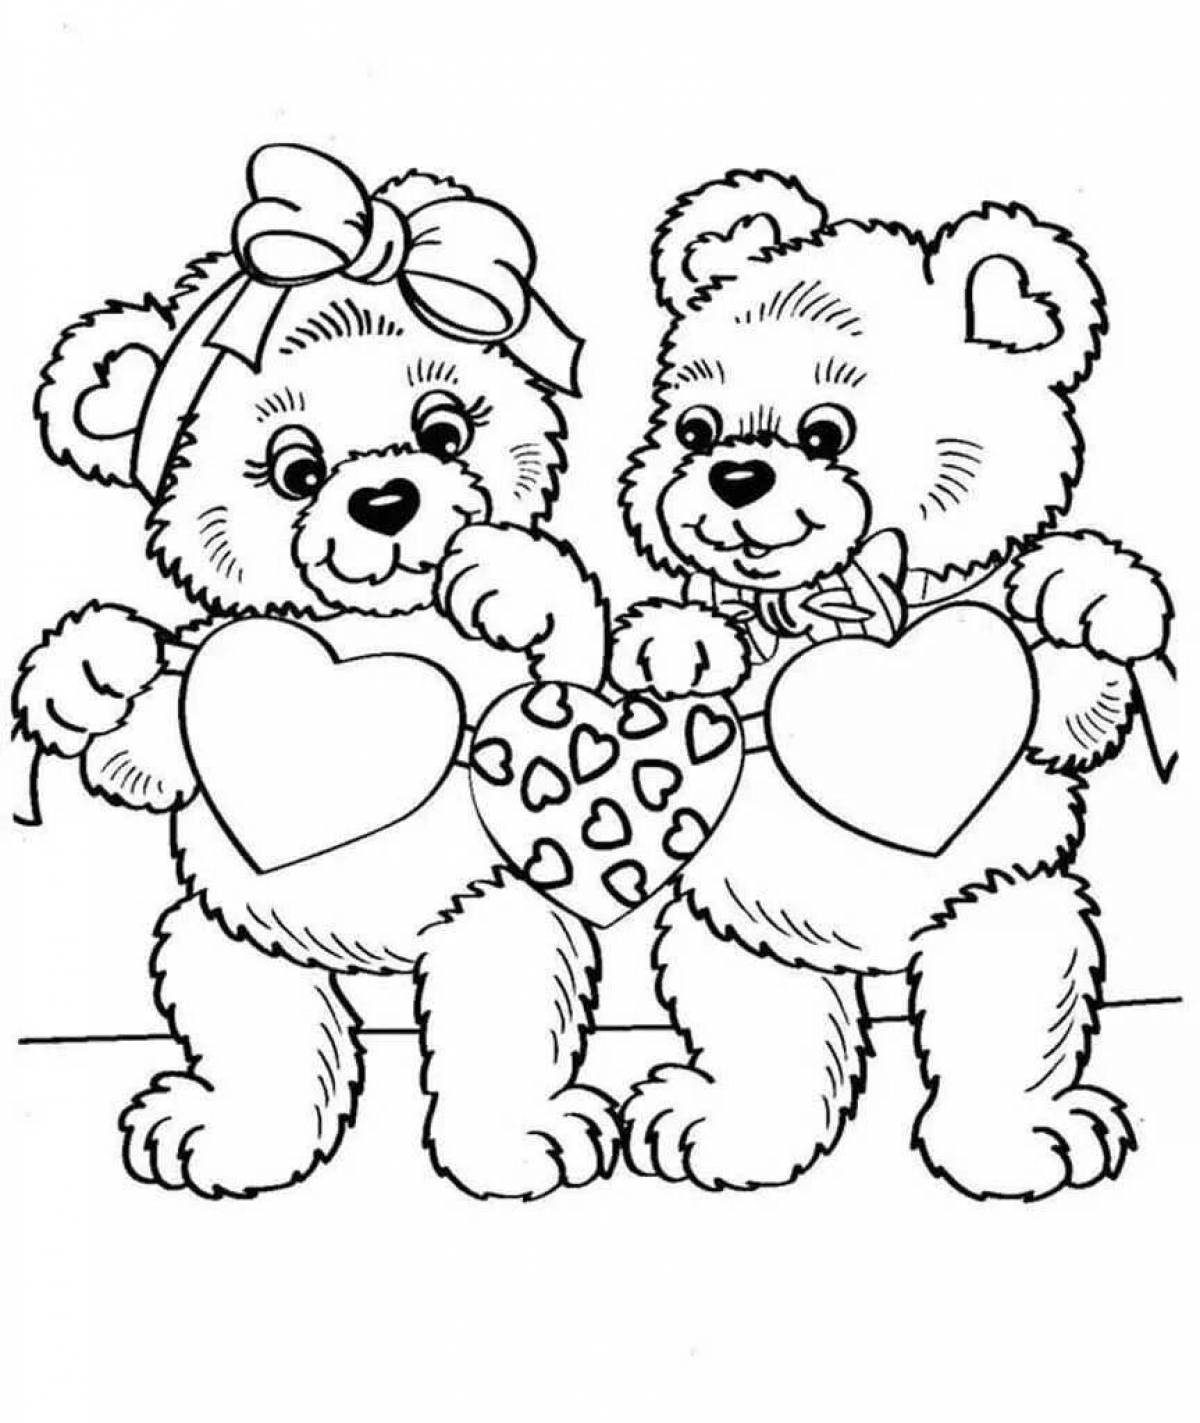 Furry teddy bear with a heart coloring book